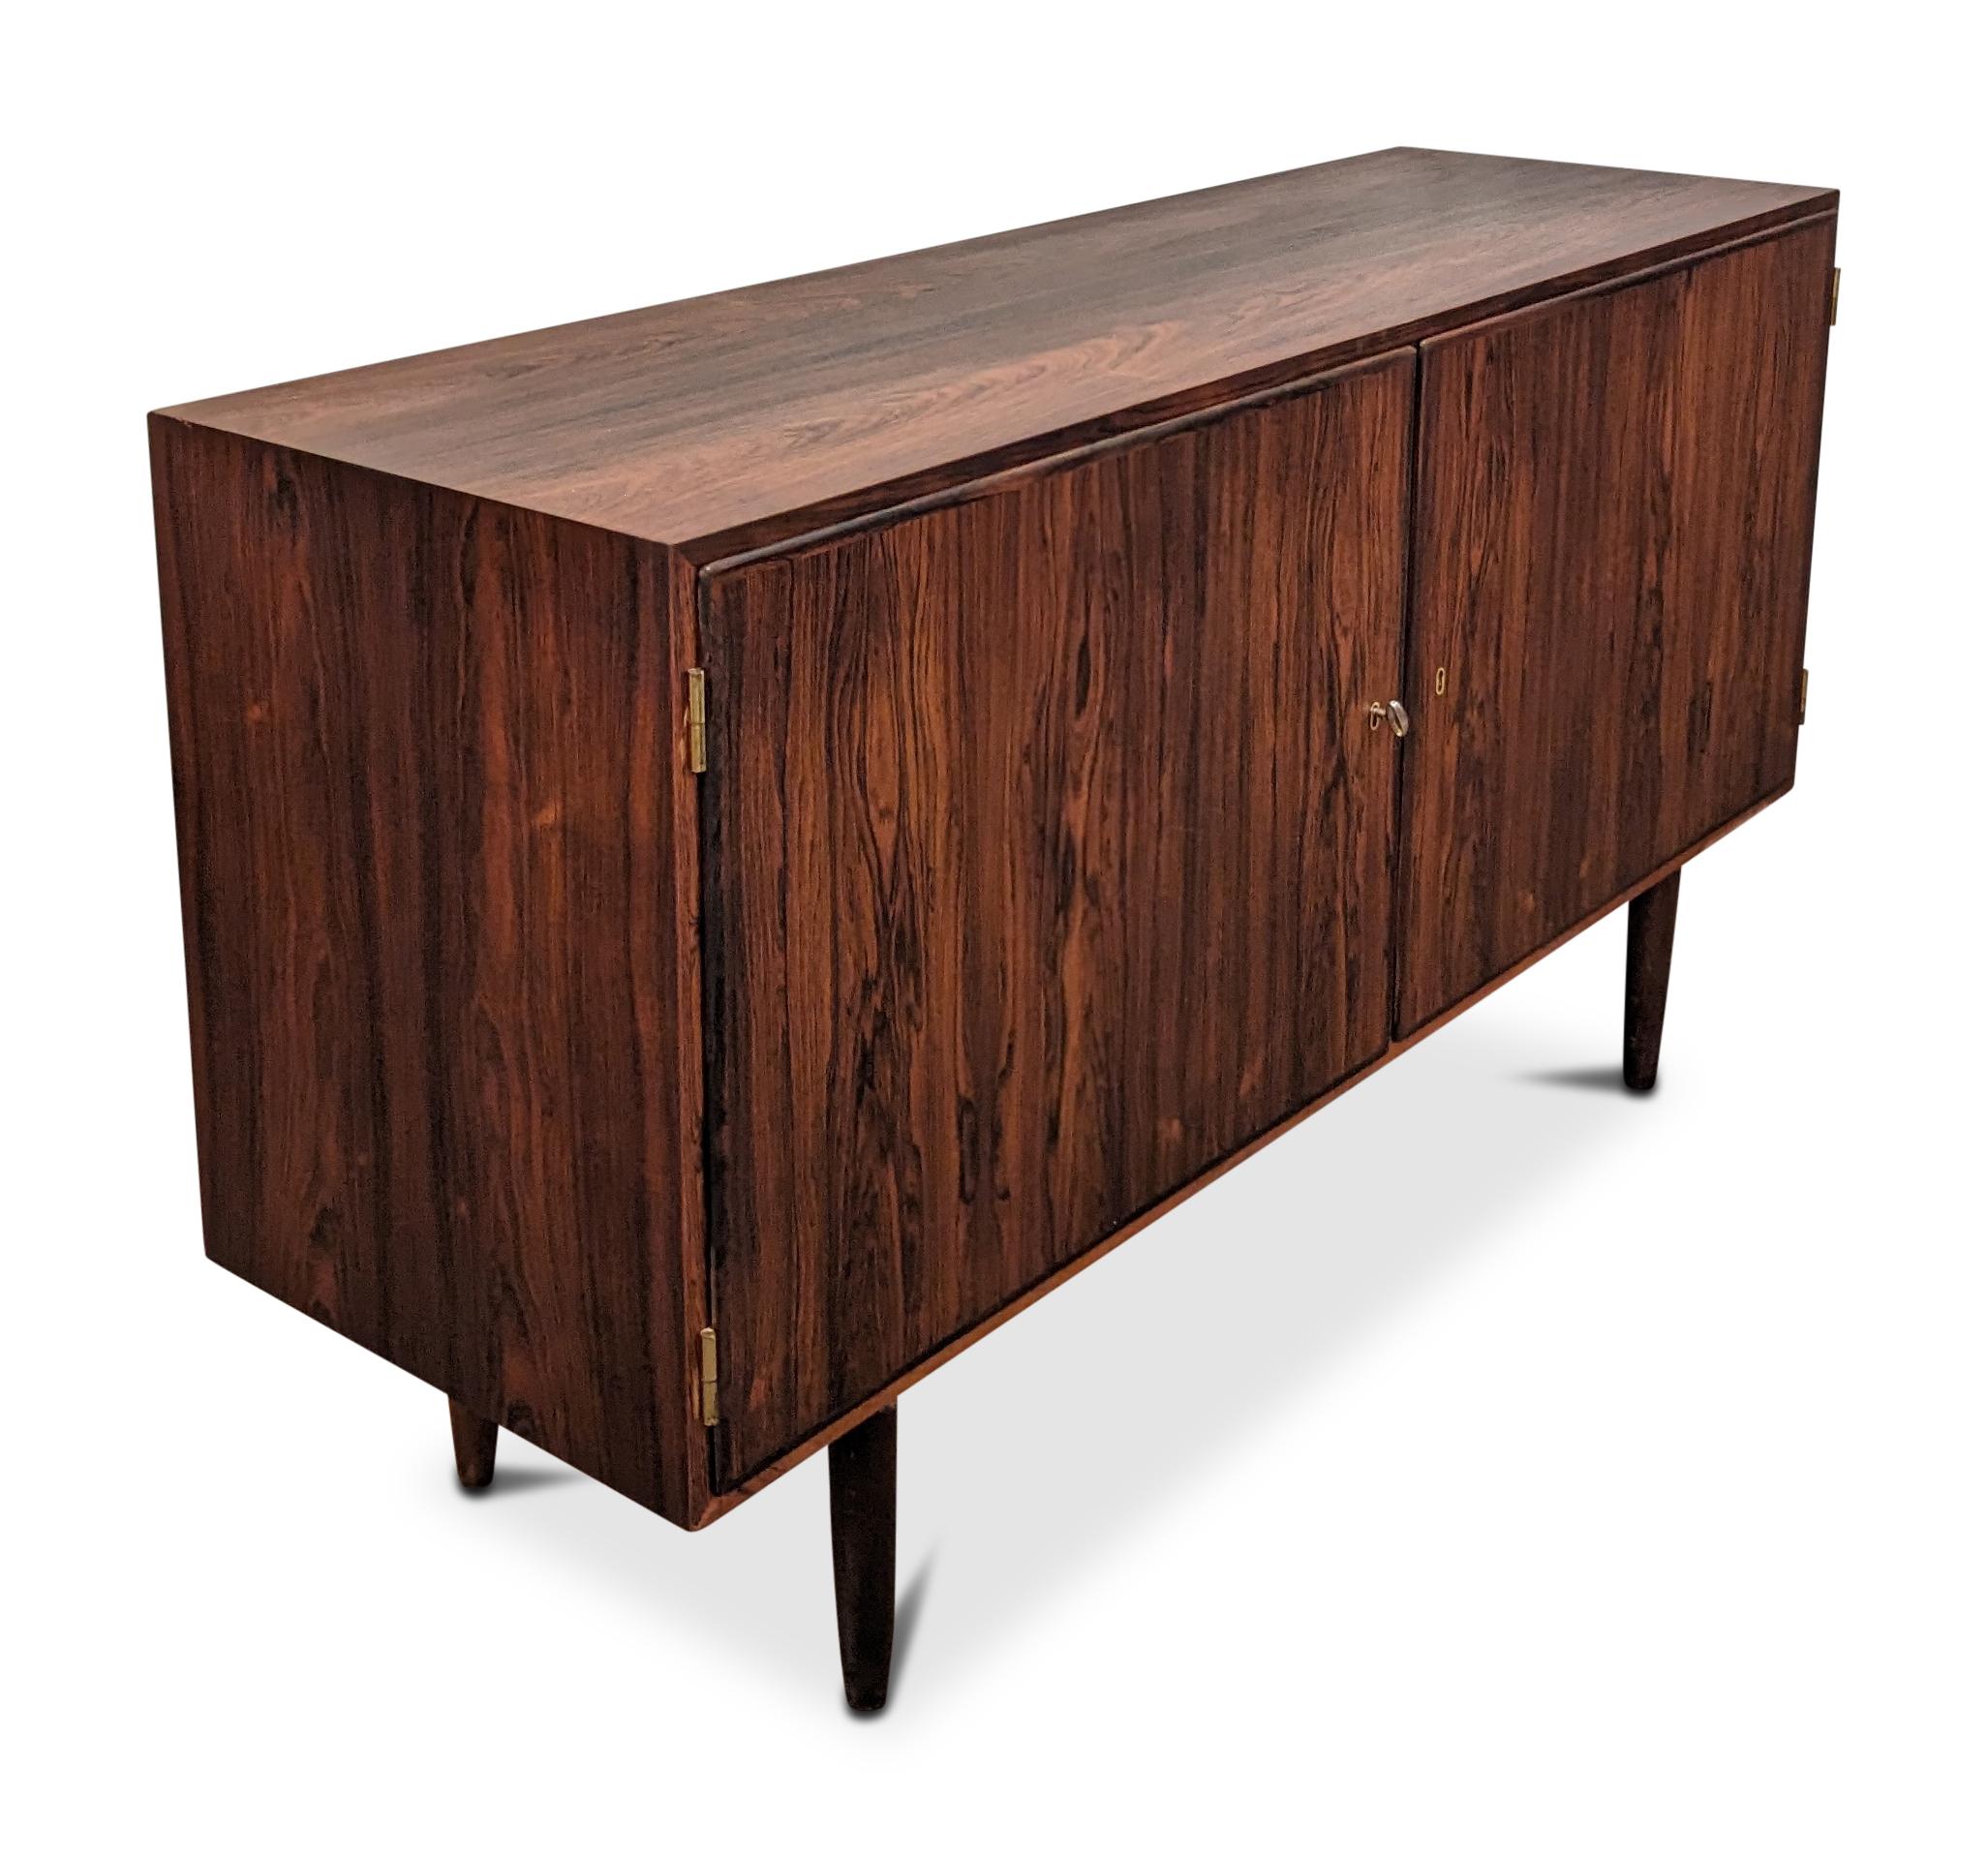 Mid-20th Century Vintage Danish Mid Century Rosewood Sideboard / Cabinet - 122363 For Sale